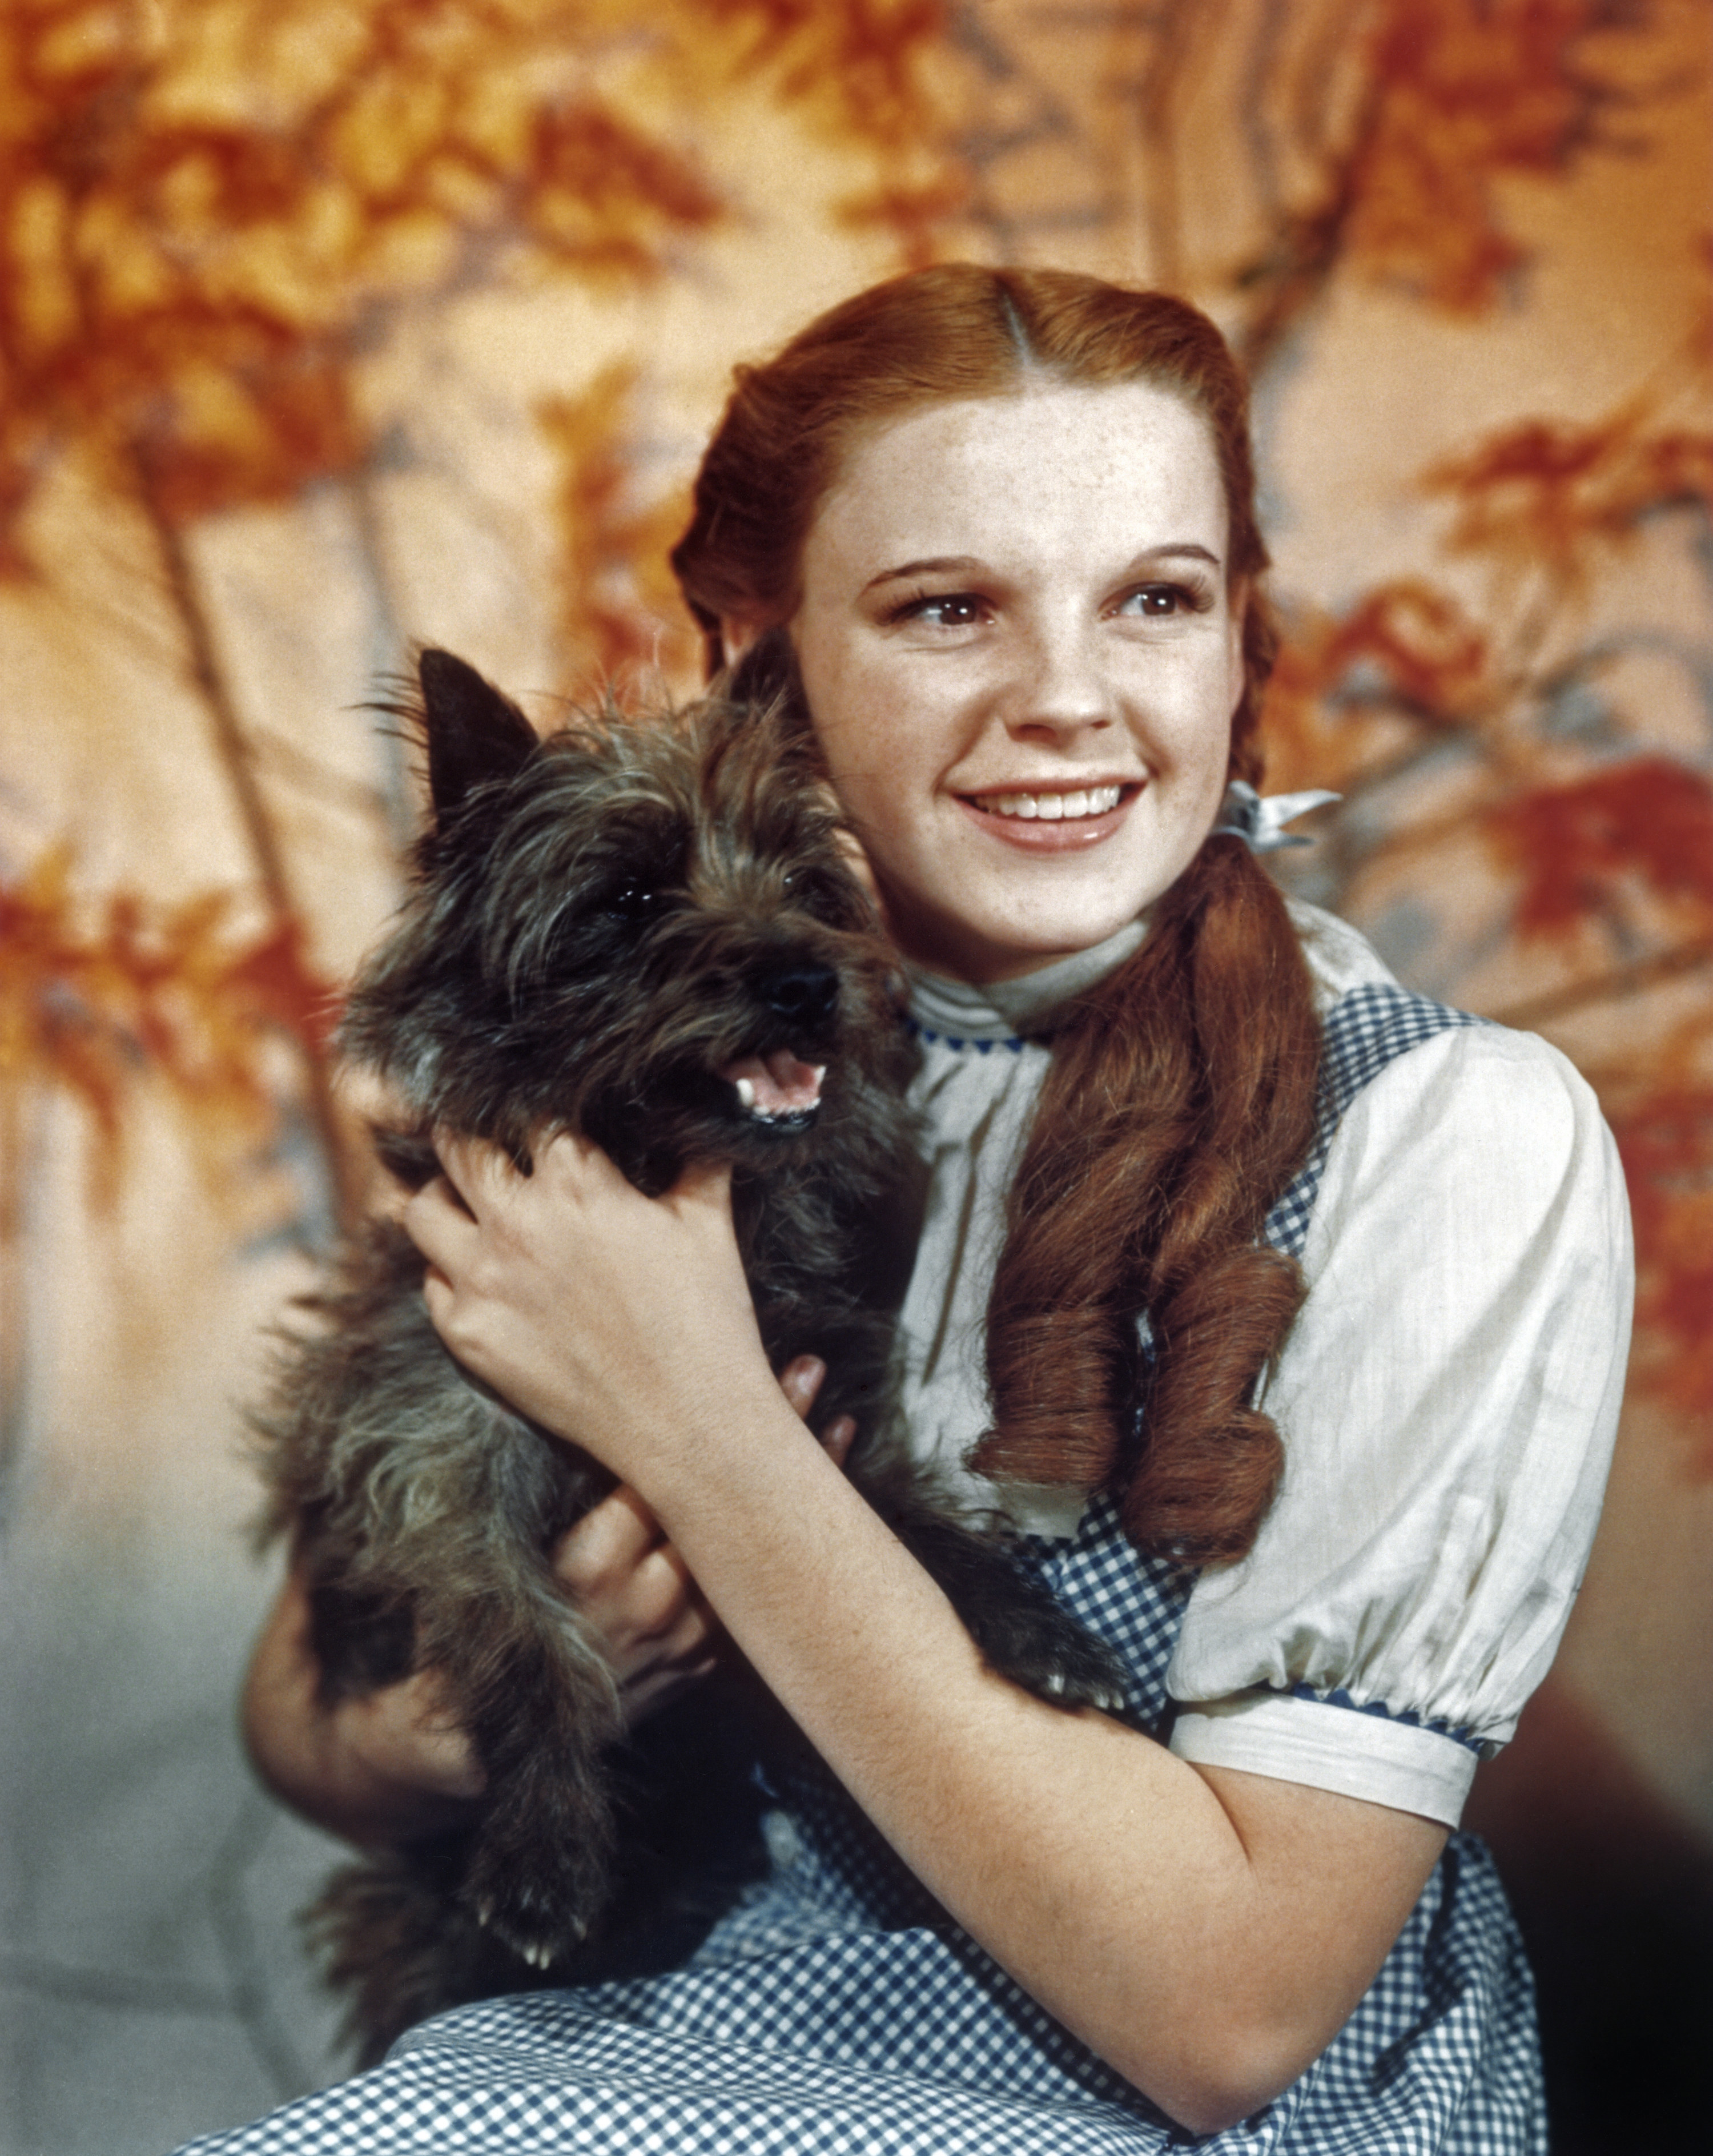 An image of Judy as Dorothy in the Wizard of Oz, holding Toto the dog